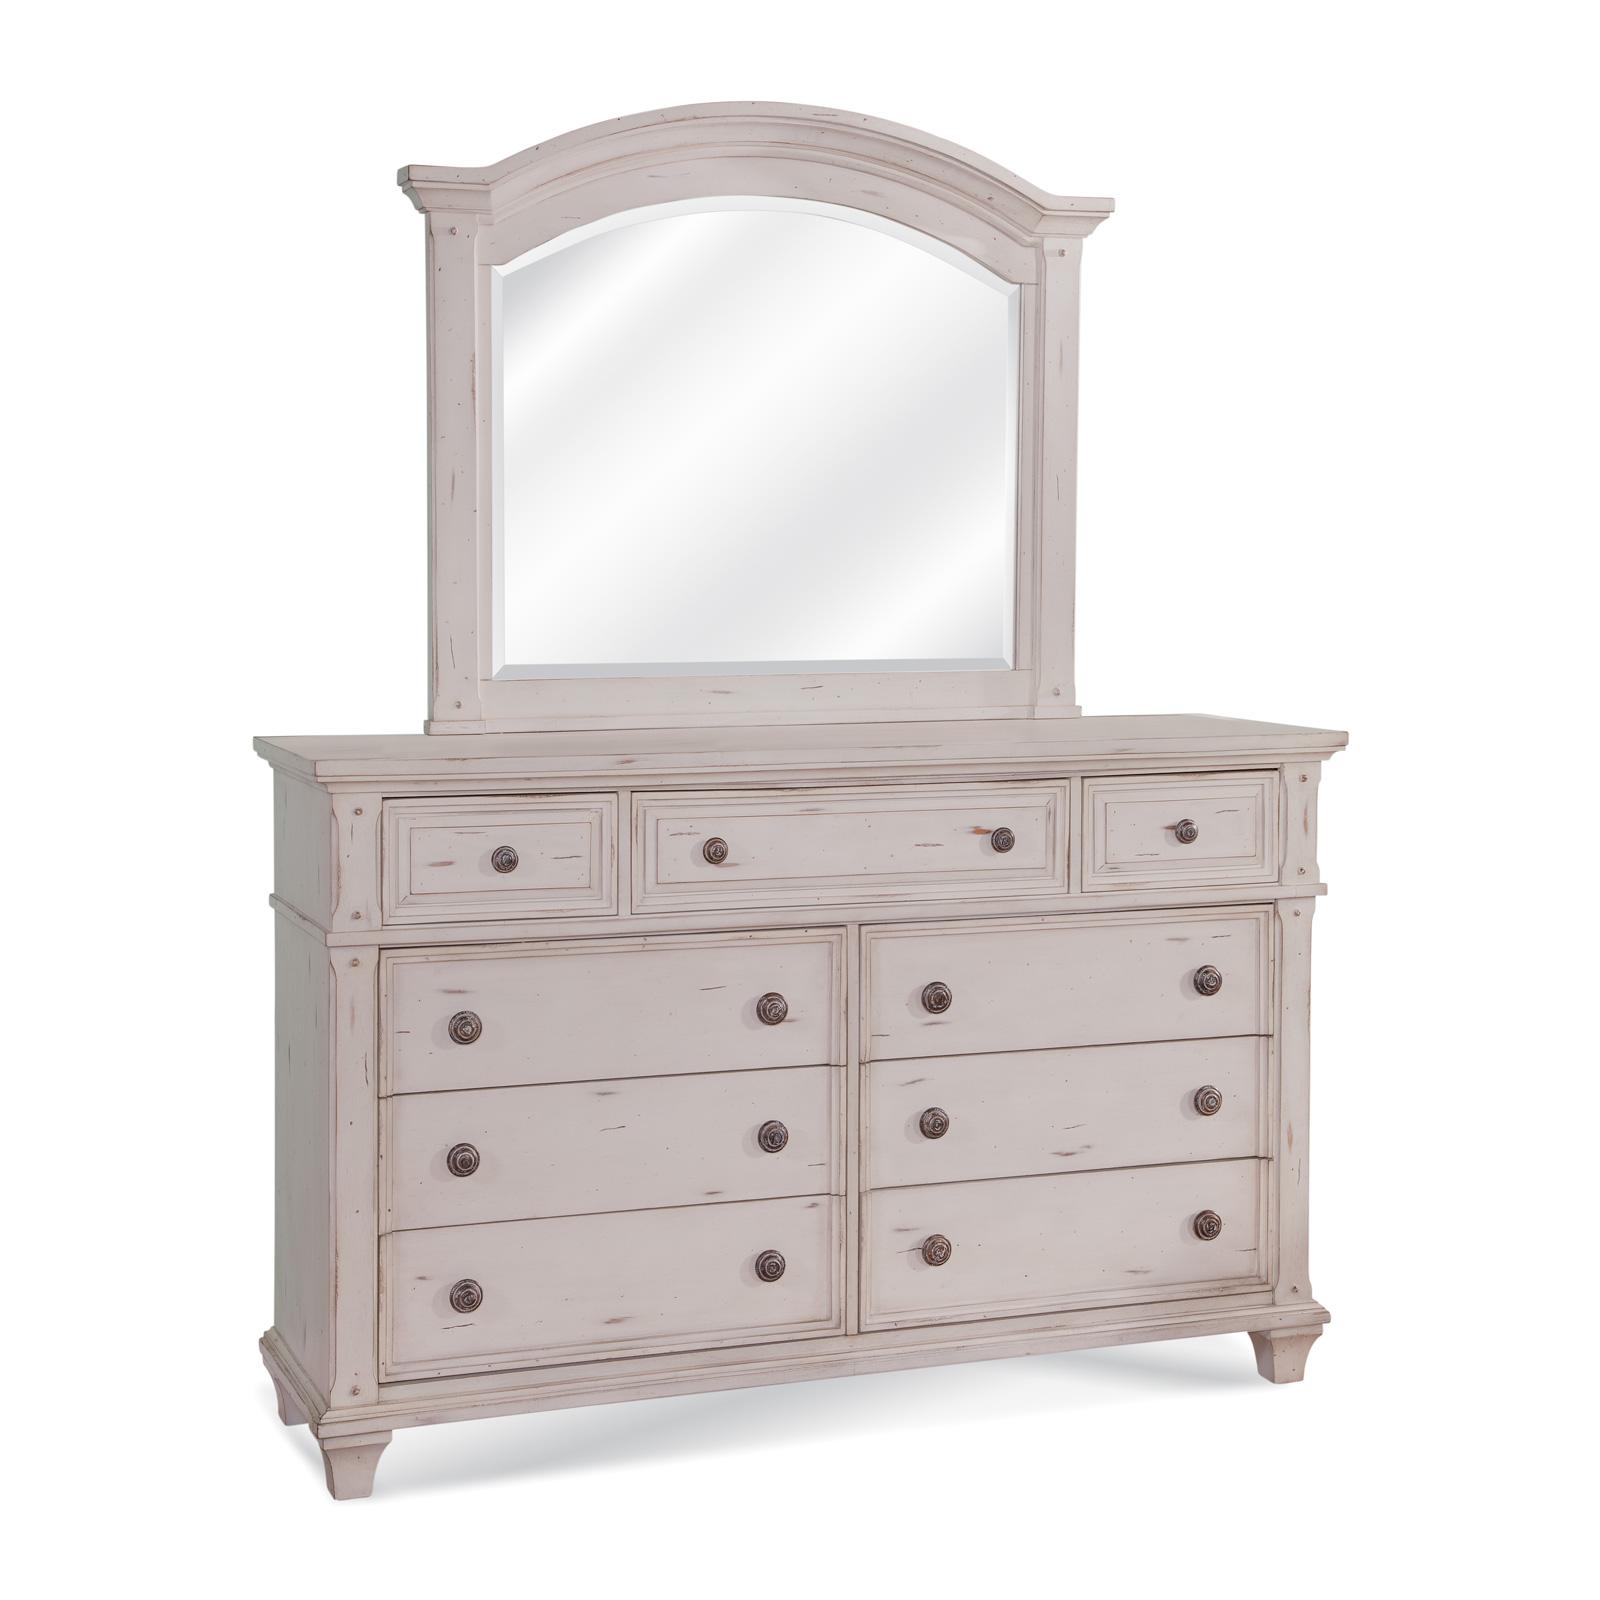 American Woodcrafters SEDONA 2410-DLM Dresser With Mirror